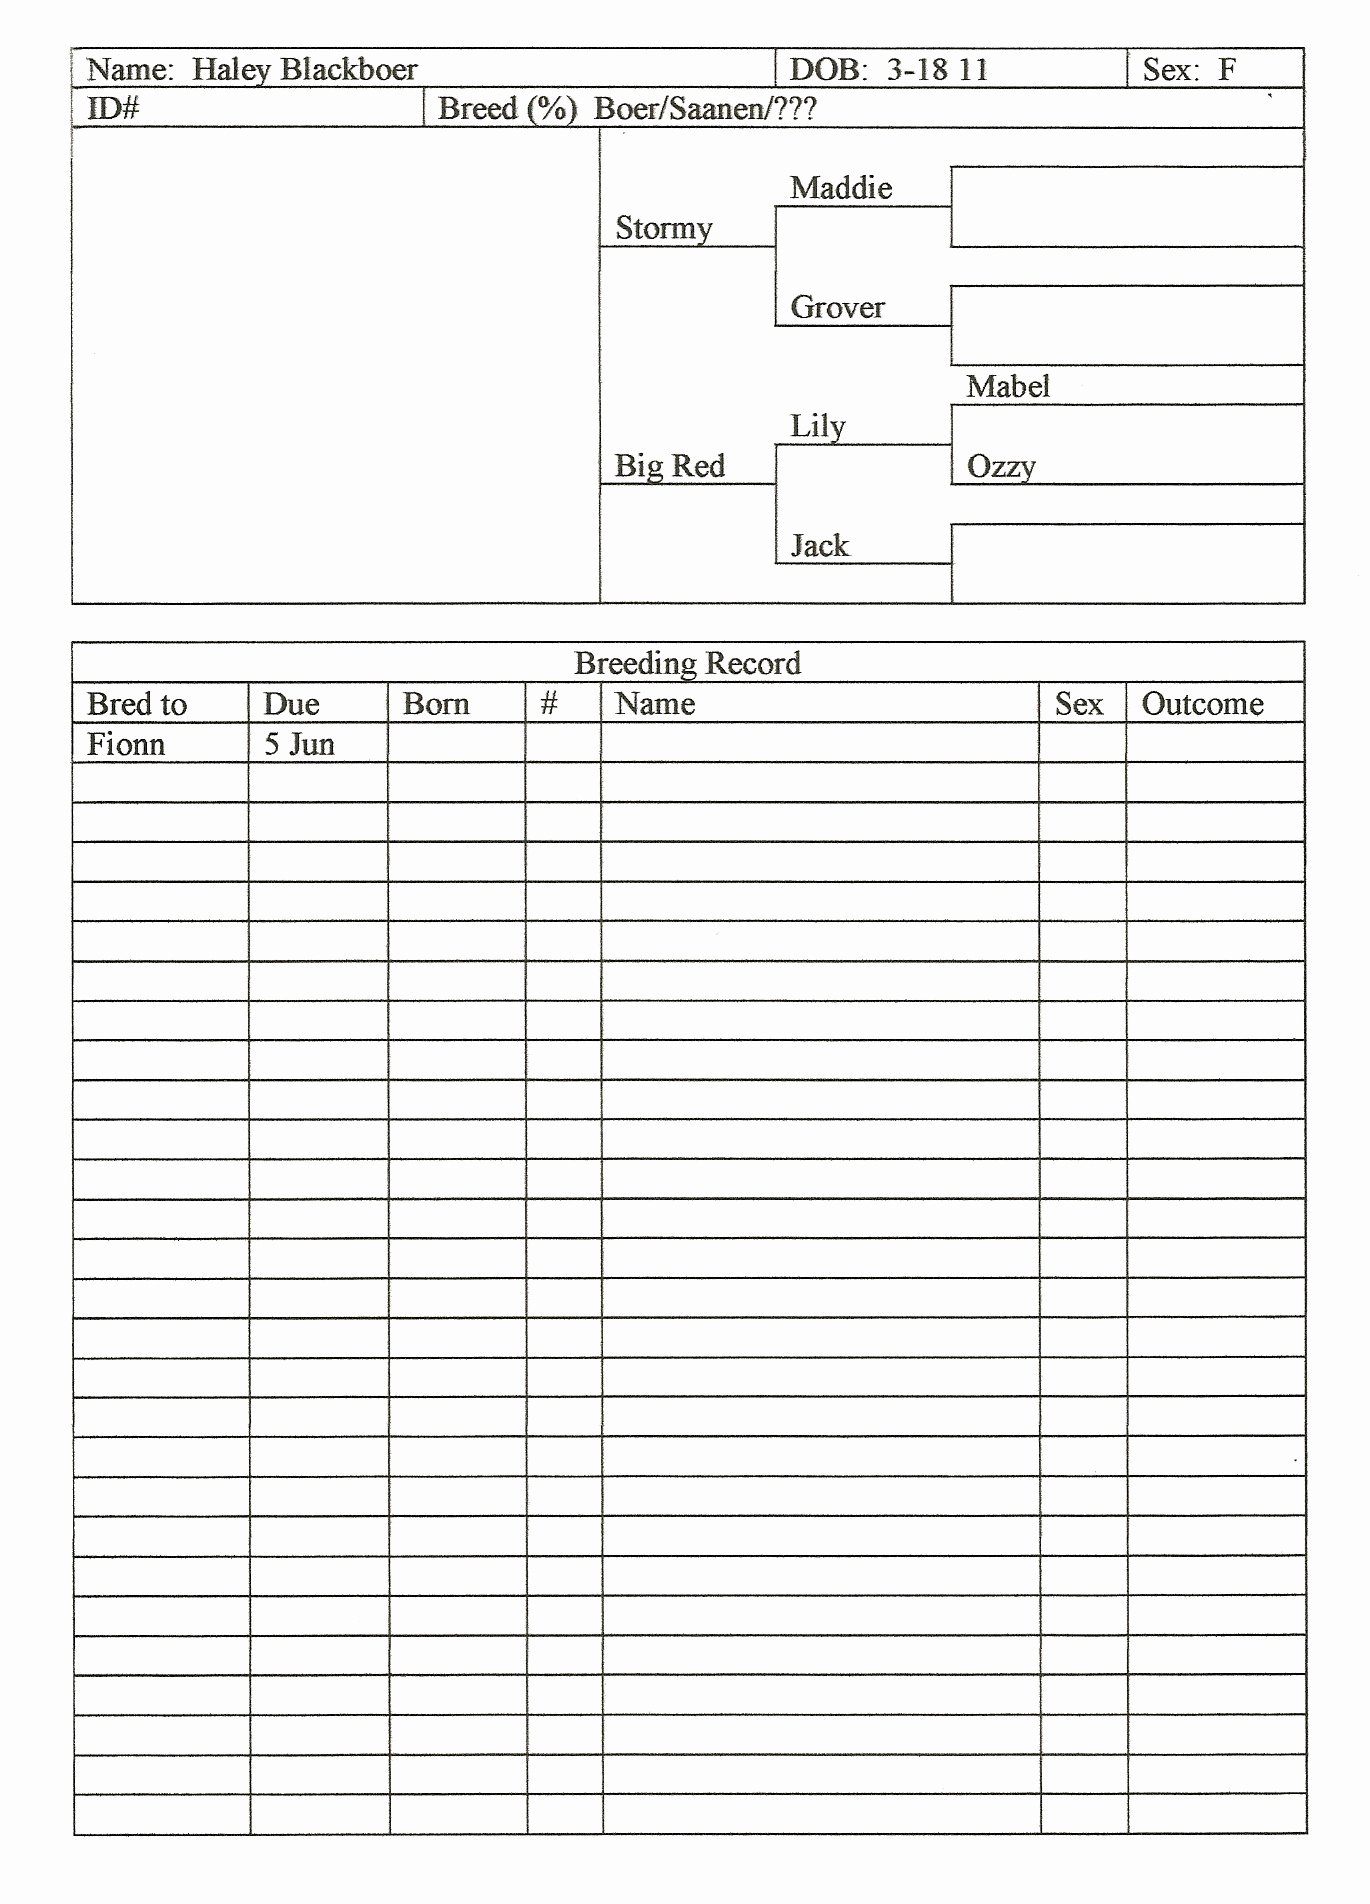 Veterinary Medical Records Templates Lovely Record Keeping for Goats